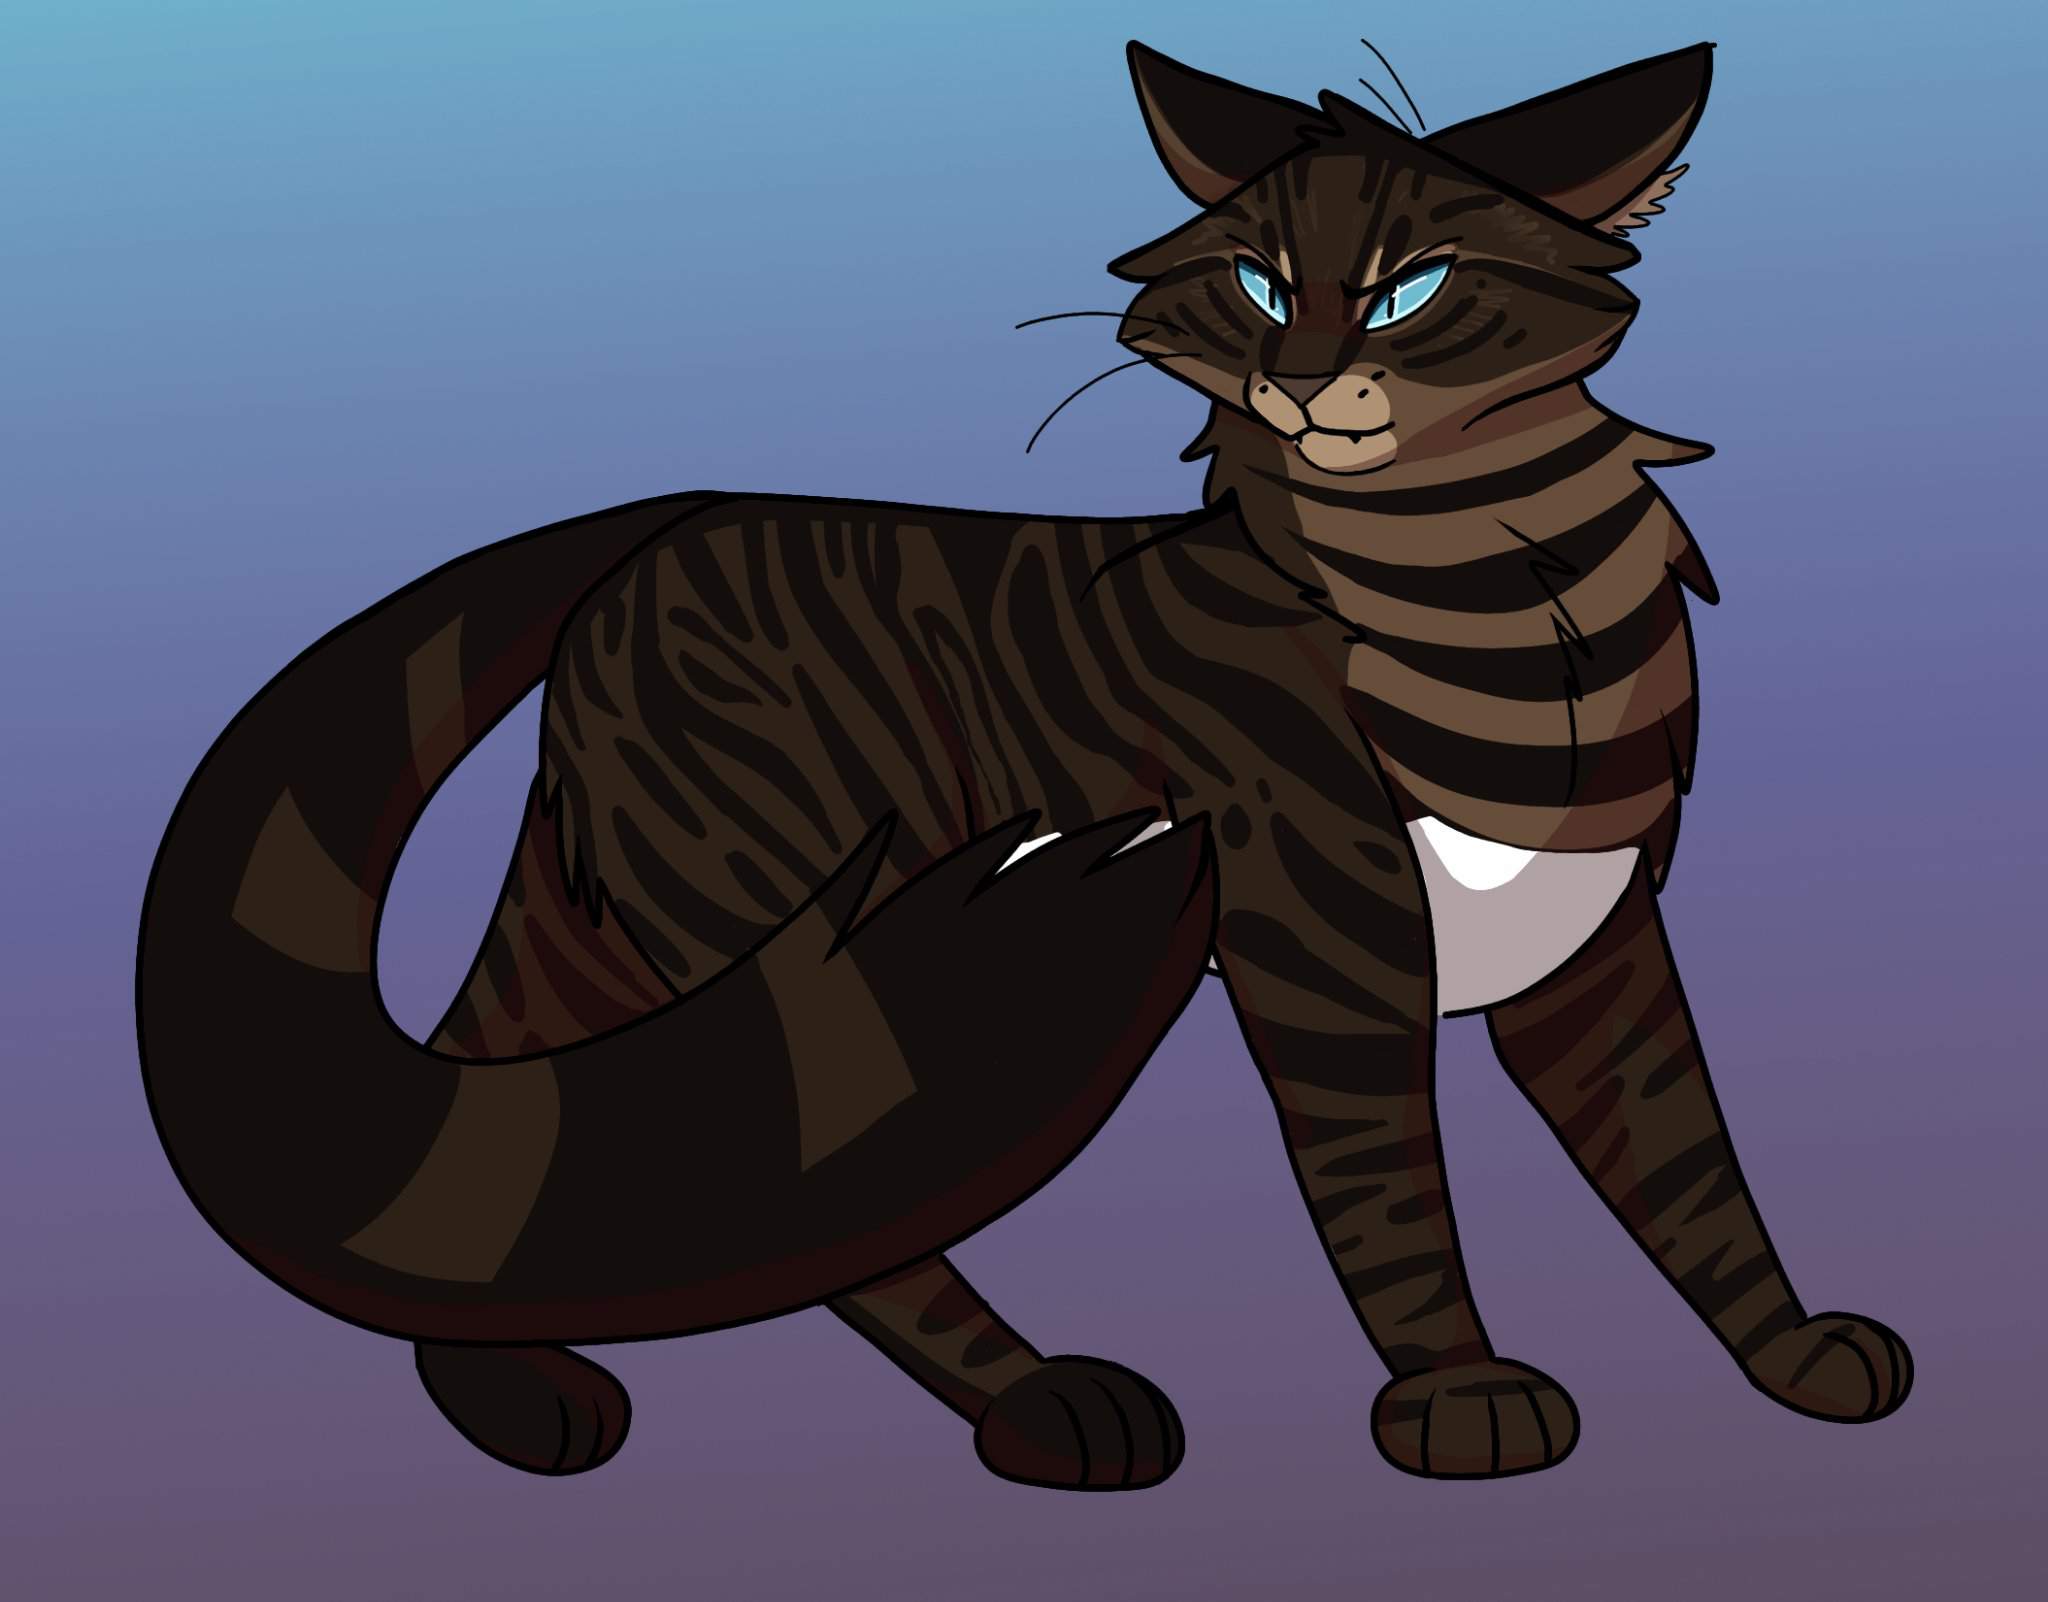 1. "Hawkfrost with Blue Hair" by Warrior Cats Wiki - wide 8